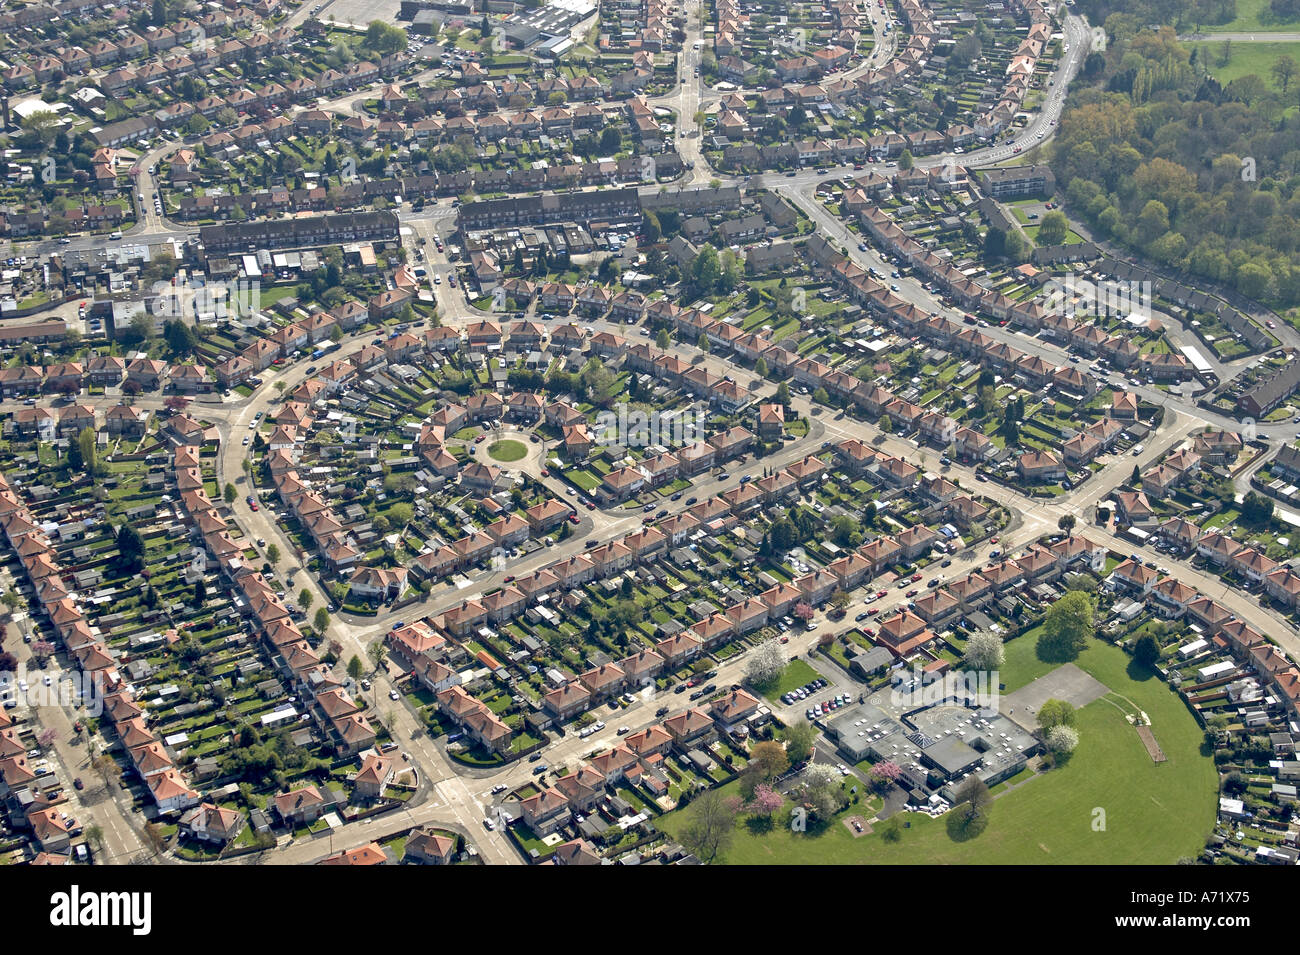 Aerial high level oblique view of houses and suburbs of Hillingdon with Hedgewood School Hayes London UB4 England 2005 Stock Photo